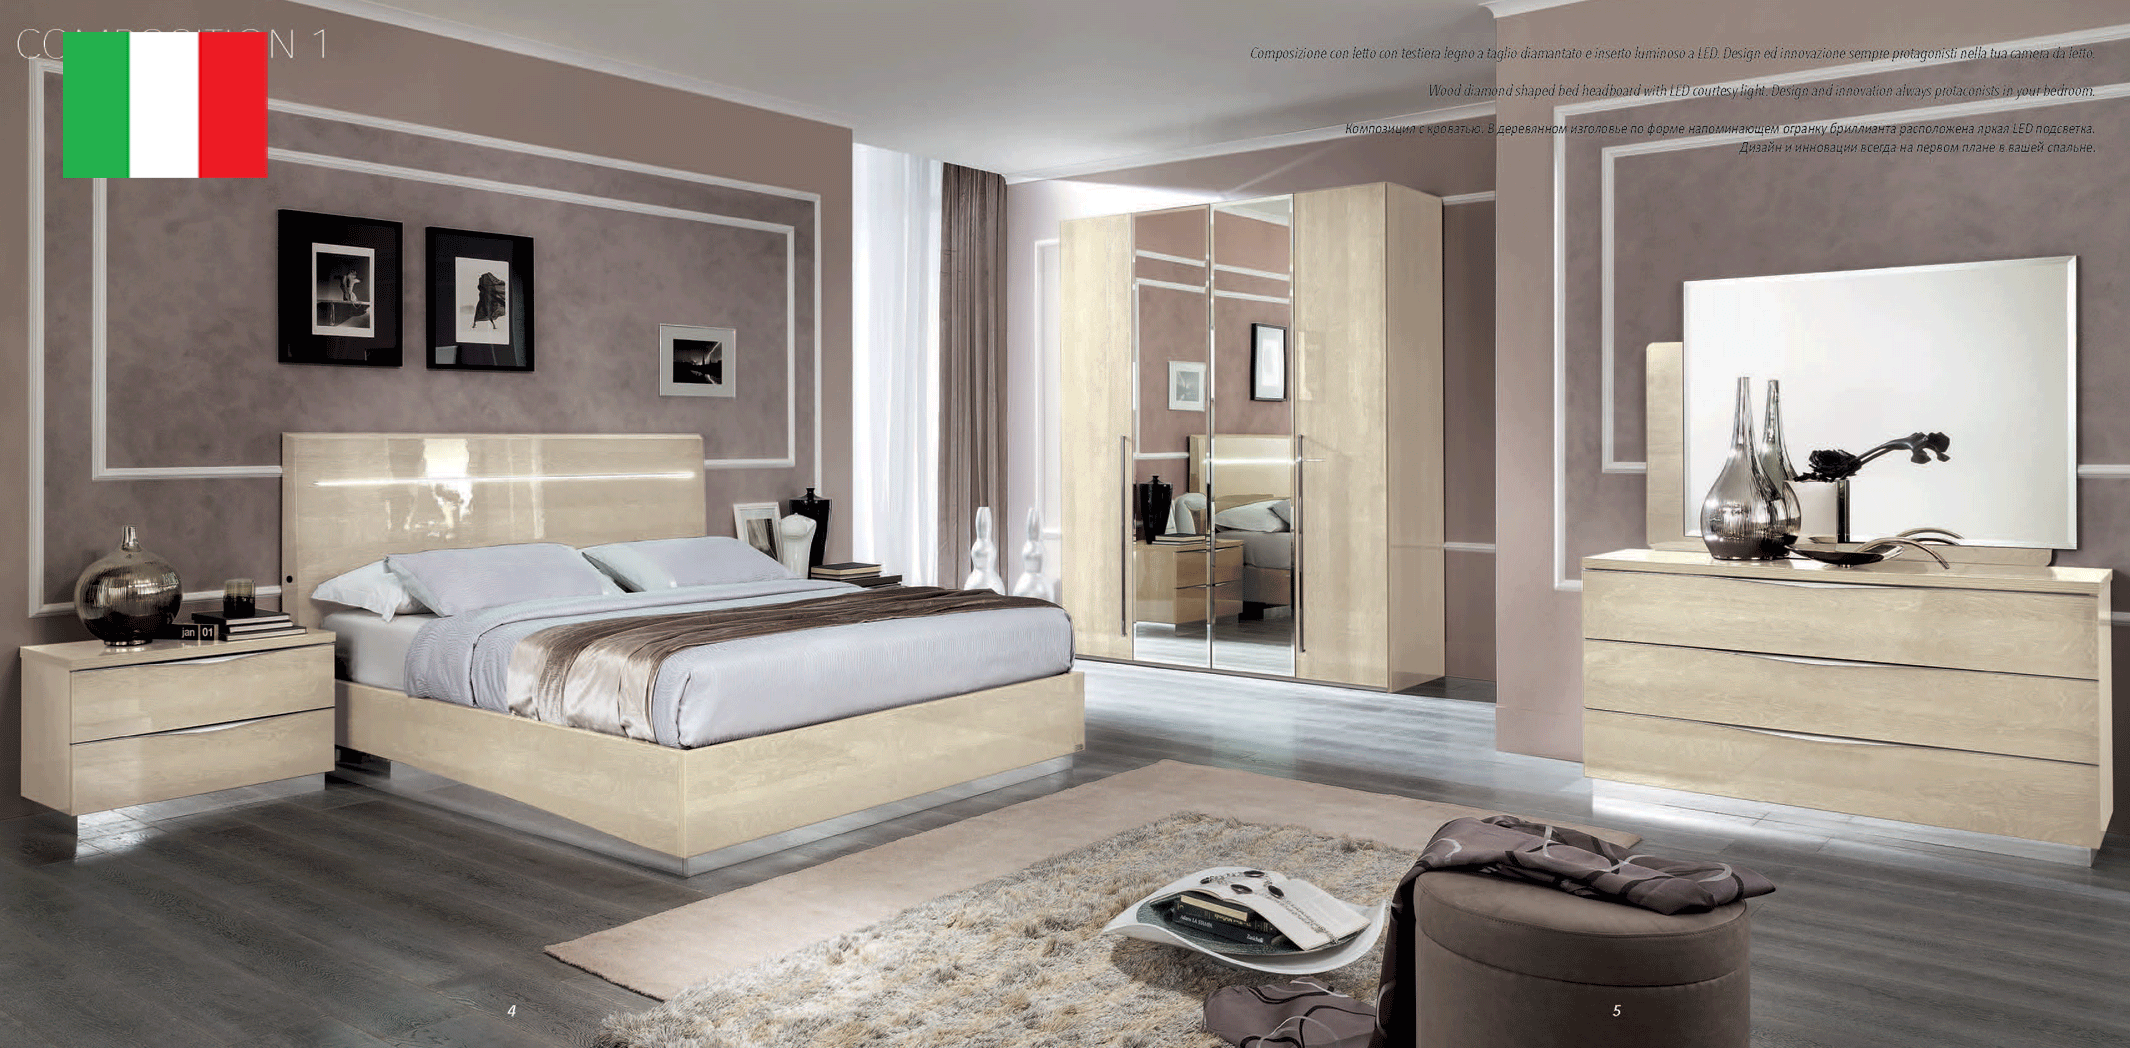 Bedroom Furniture Beds Platinum Bedroom BETULLIA SABBIA by Camelgroup – Italy